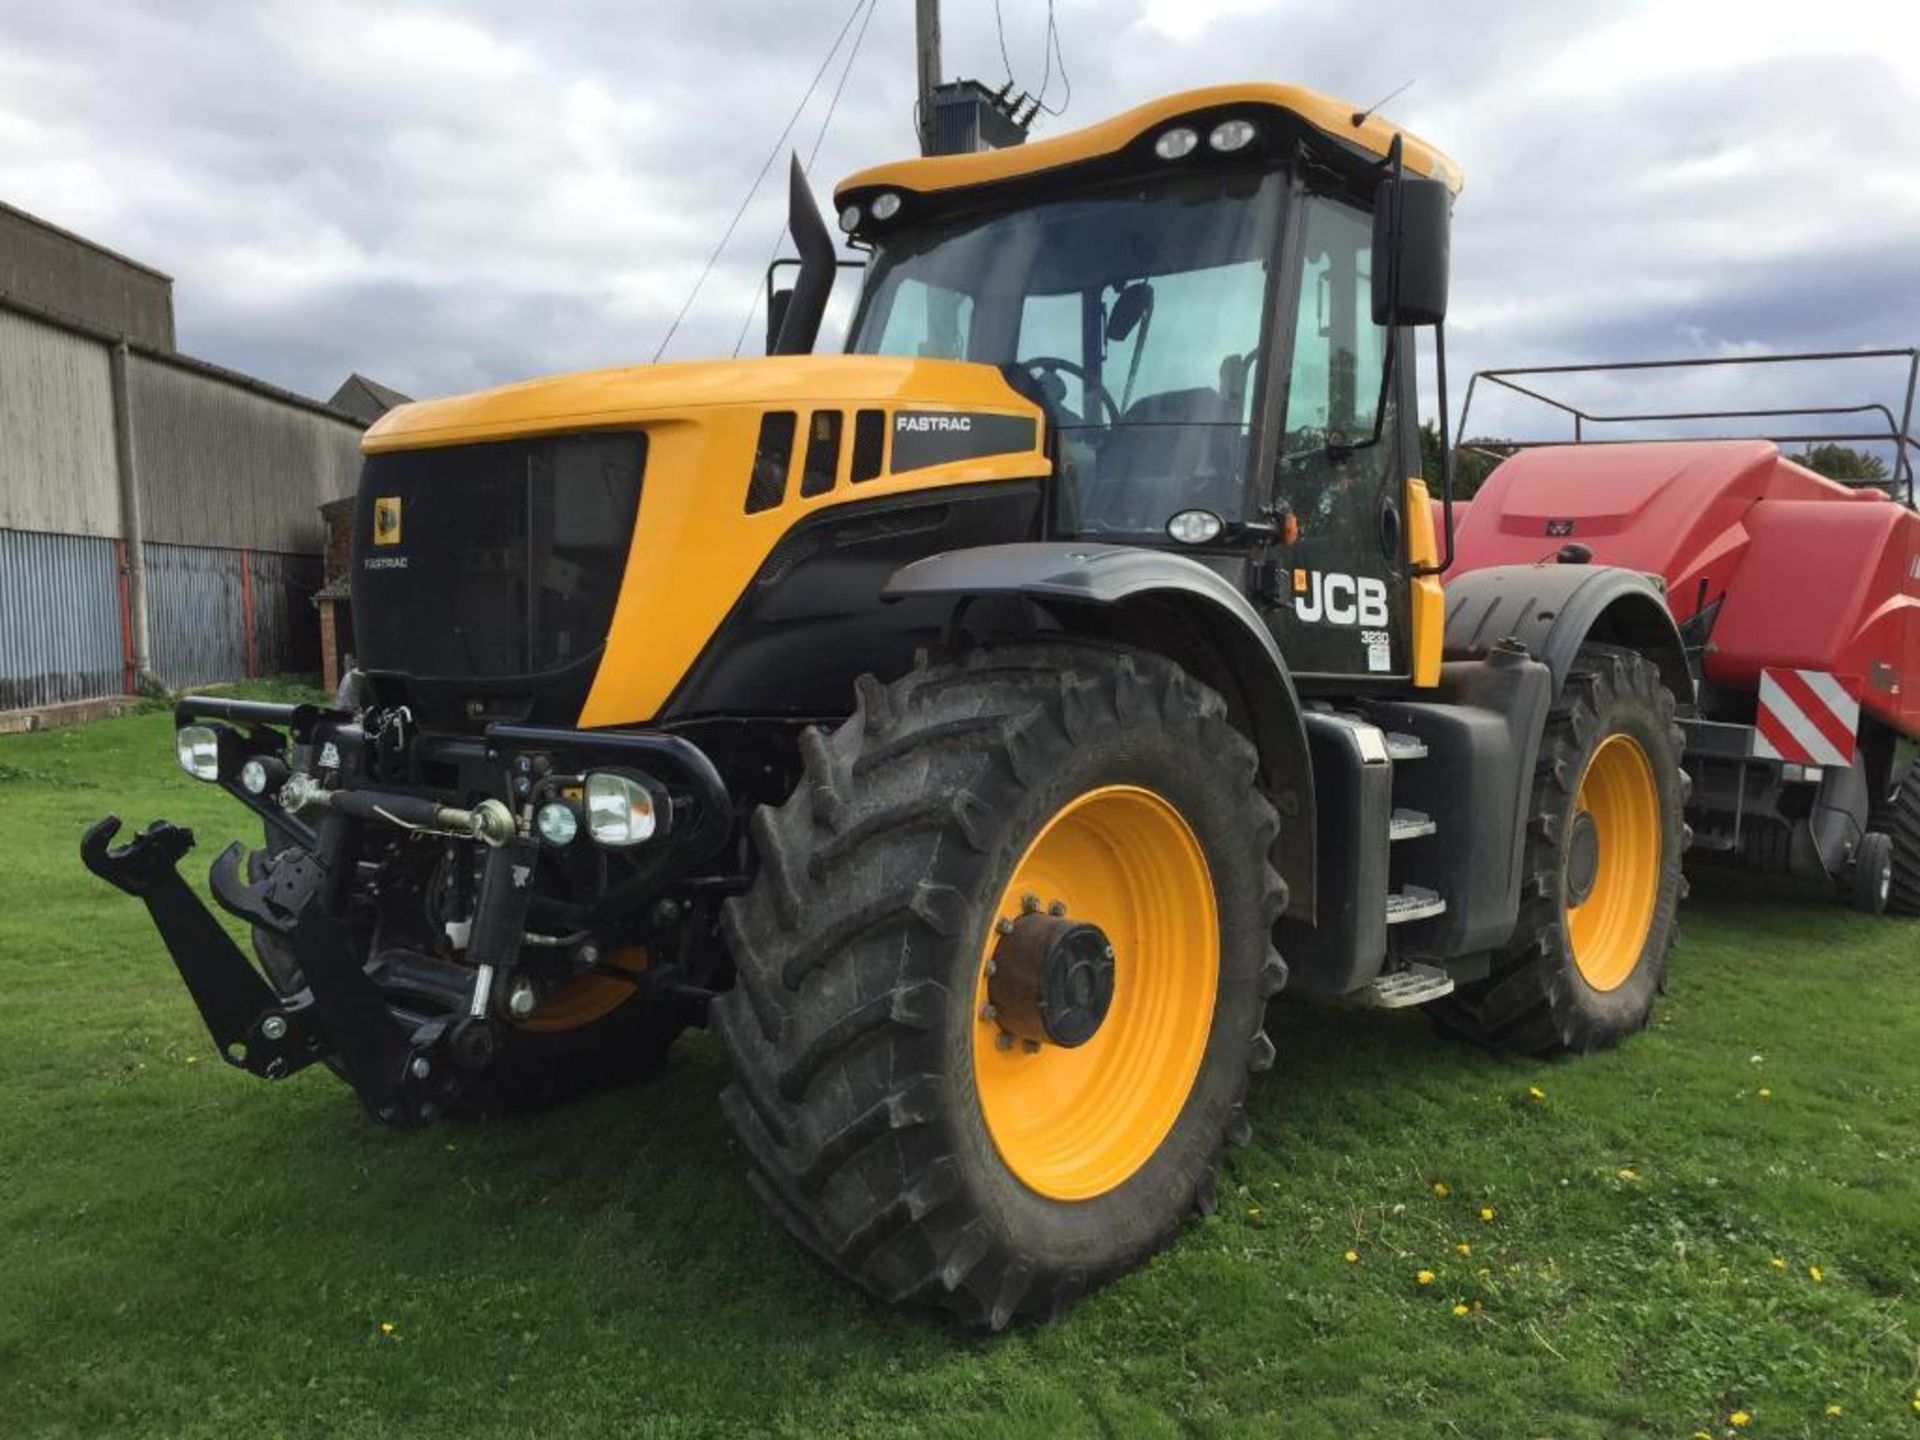 2017 JCB Fastrac 3230 Xtra 65Kph 4WD tractor with Zuidberg front linkage, 4 electric spool valves, a - Image 5 of 24